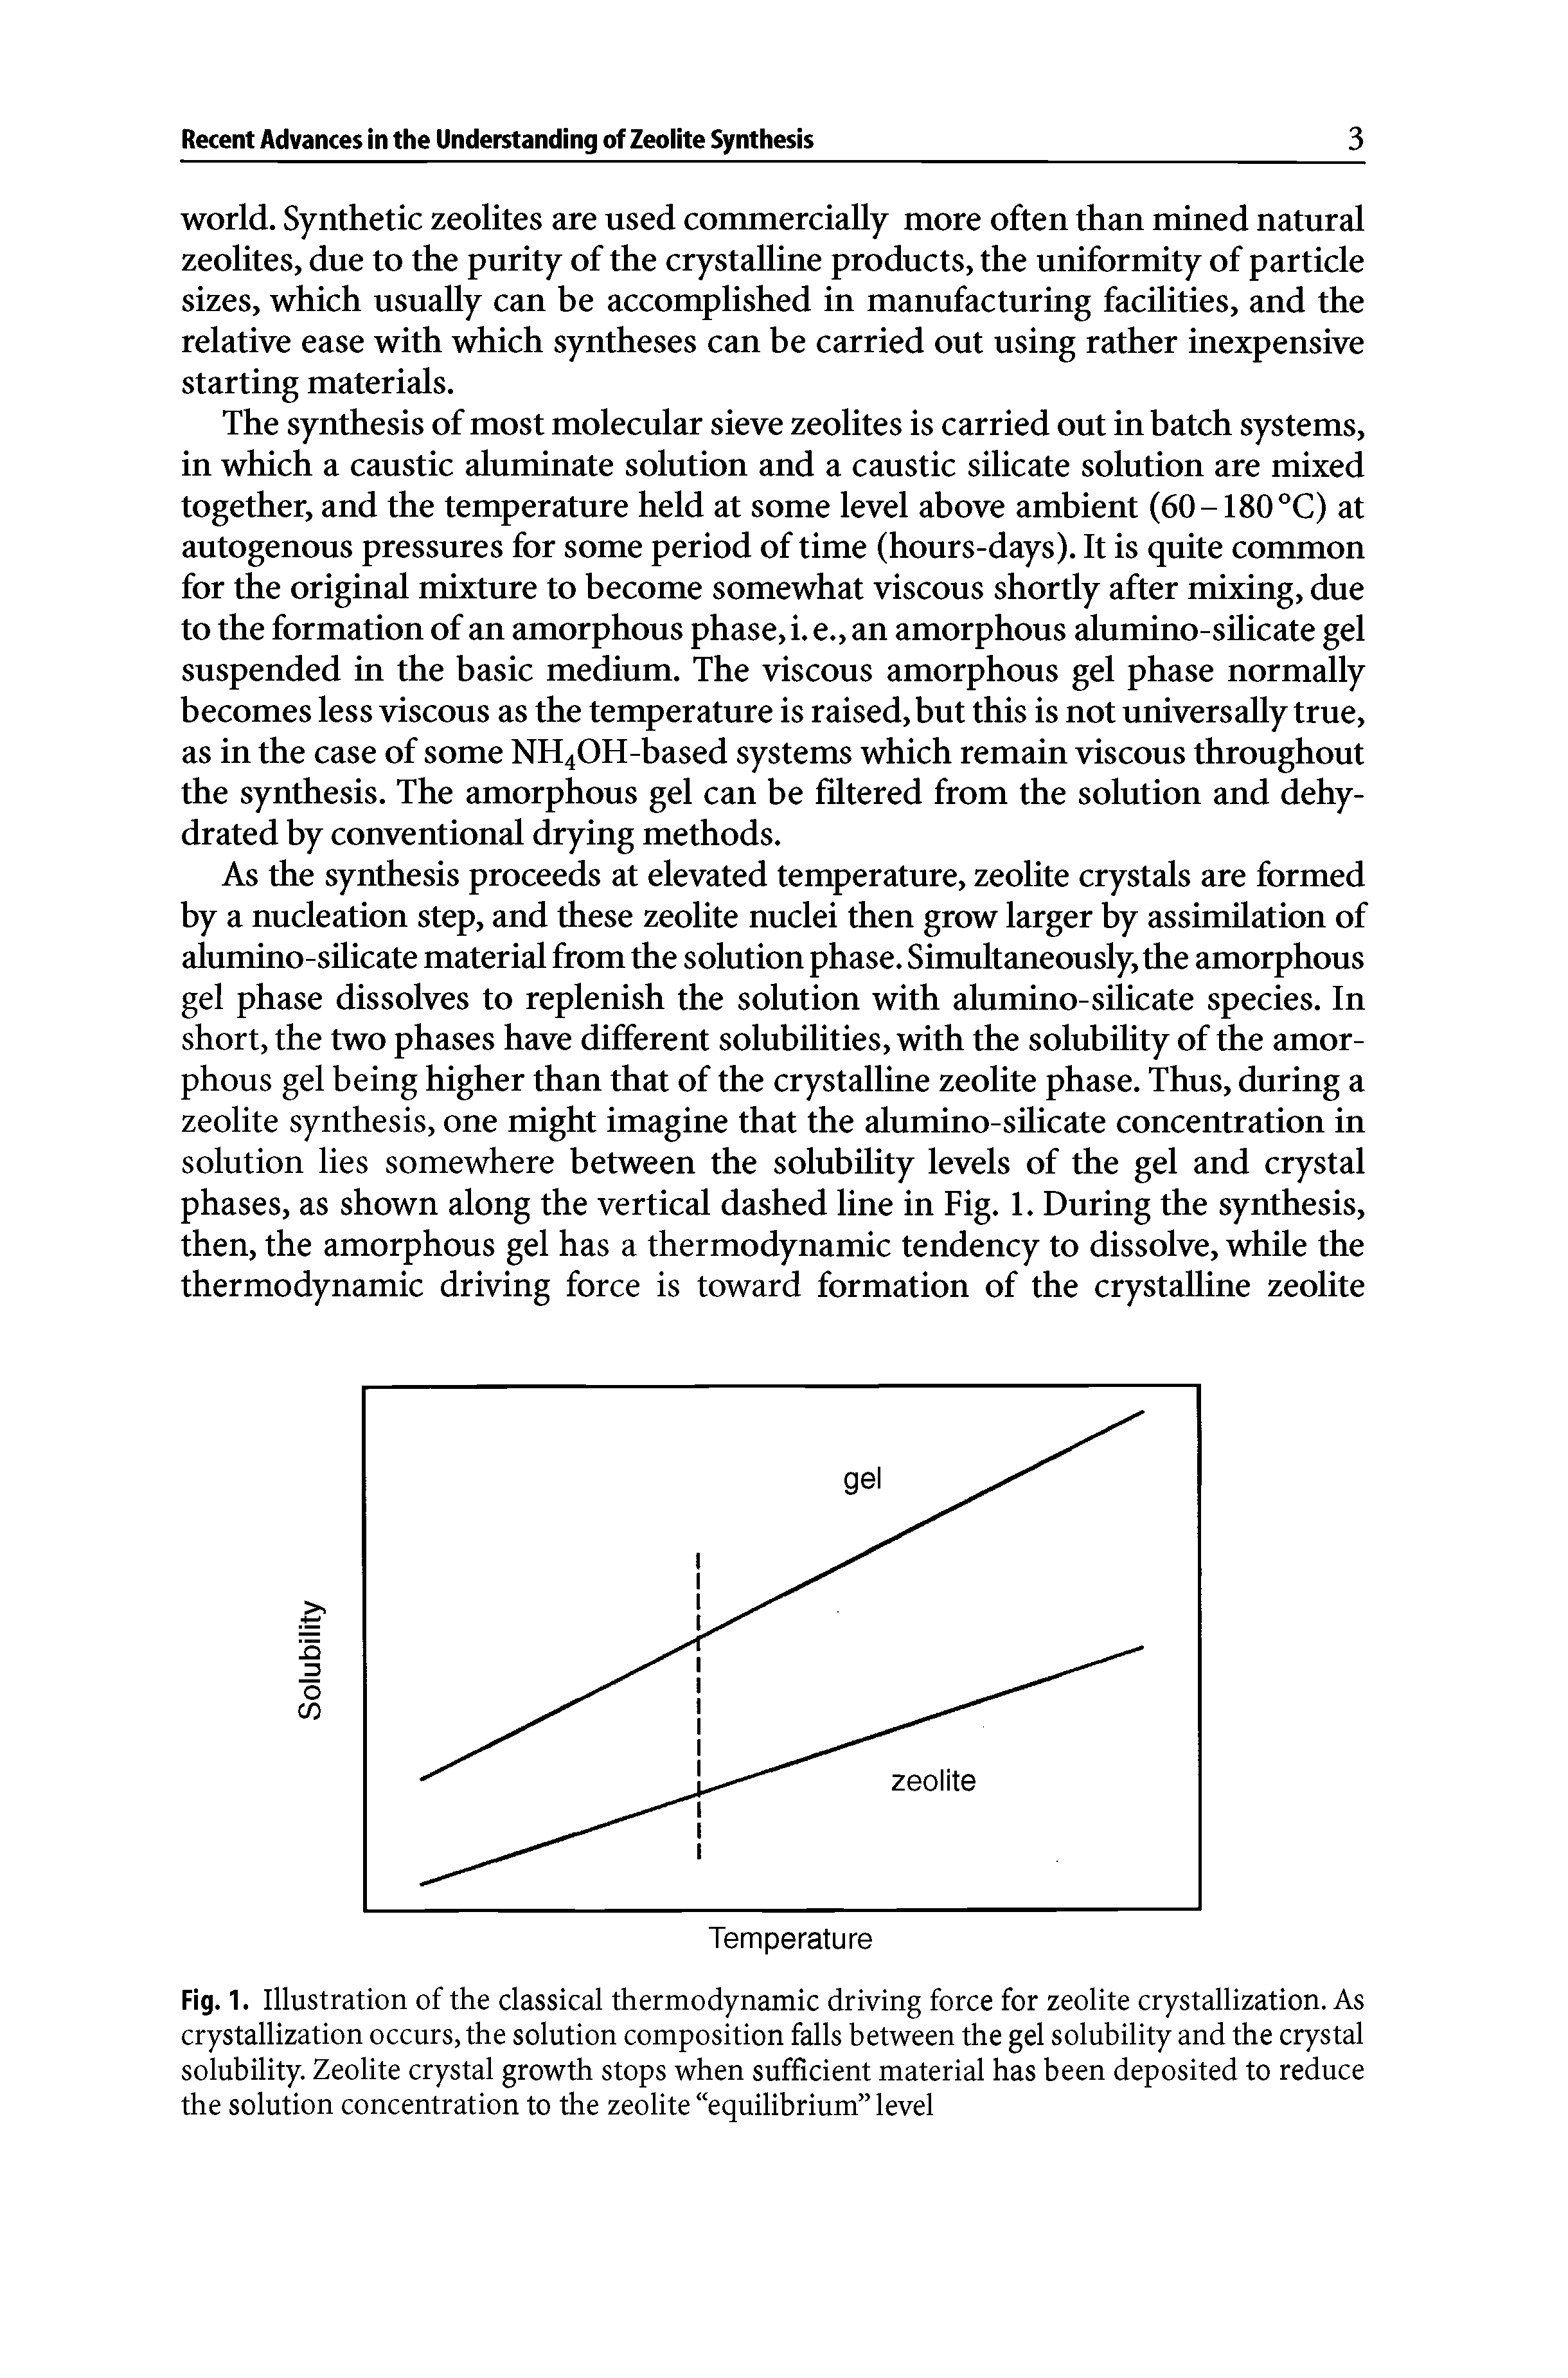 Fig. 1. Illustration of the classical thermodynamic driving force for zeolite crystallization. As crystallization occurs, the solution composition falls between the gel solubility and the crystal solubility. Zeolite crystal growth stops when sufficient material has been deposited to reduce the solution concentration to the zeolite equilibrium level...